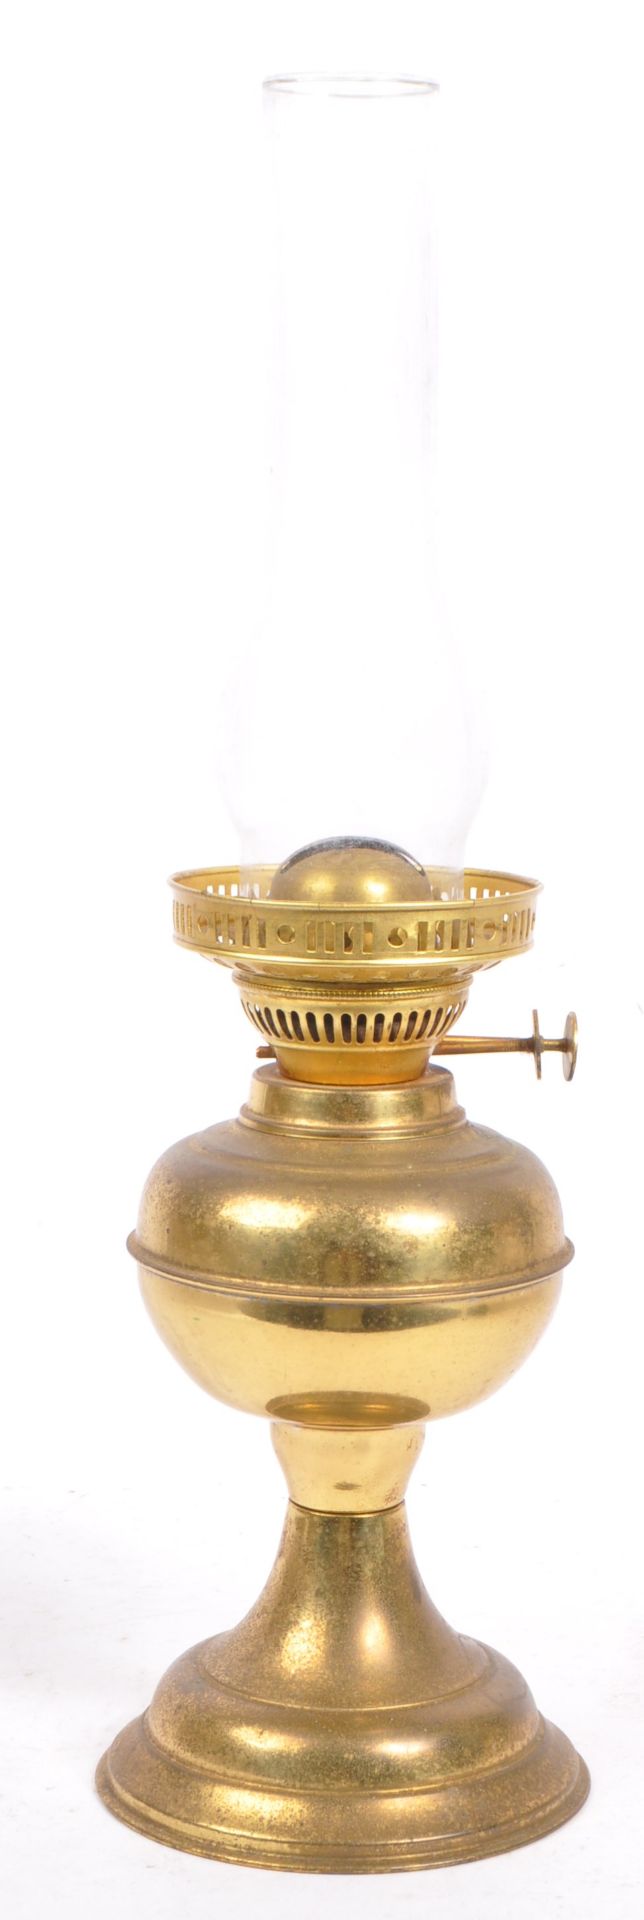 VICTORIAN 19TH CENTURY BRASS & GLASS OIL LAMP BY DUPLEX - Image 3 of 7